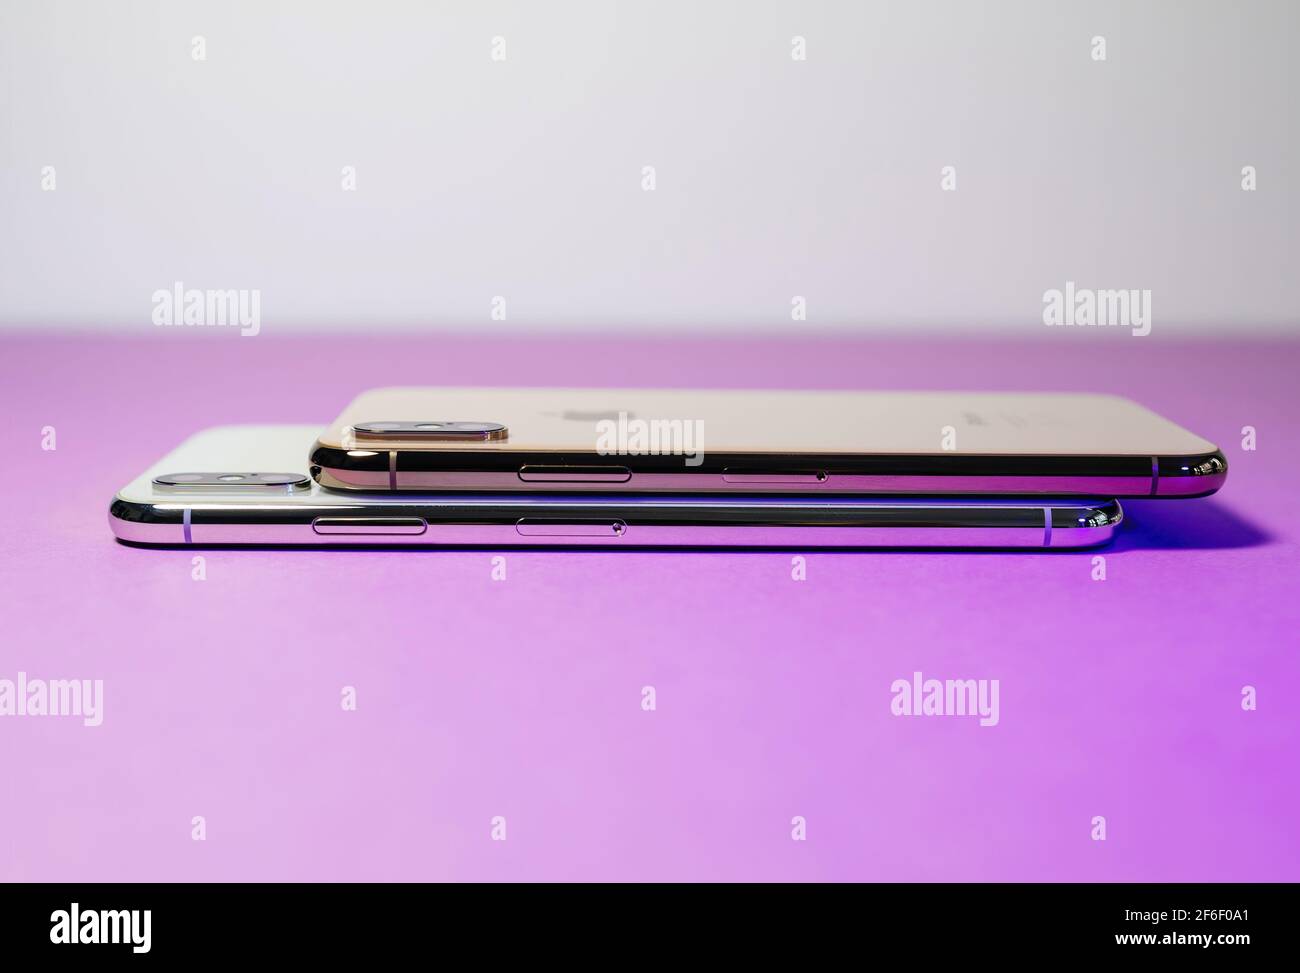 Side view of two latest Apple Computers iPhone XS gold color 256 GB smartphones Max and smaller versions - gold and silver colors - magenta background Stock Photo